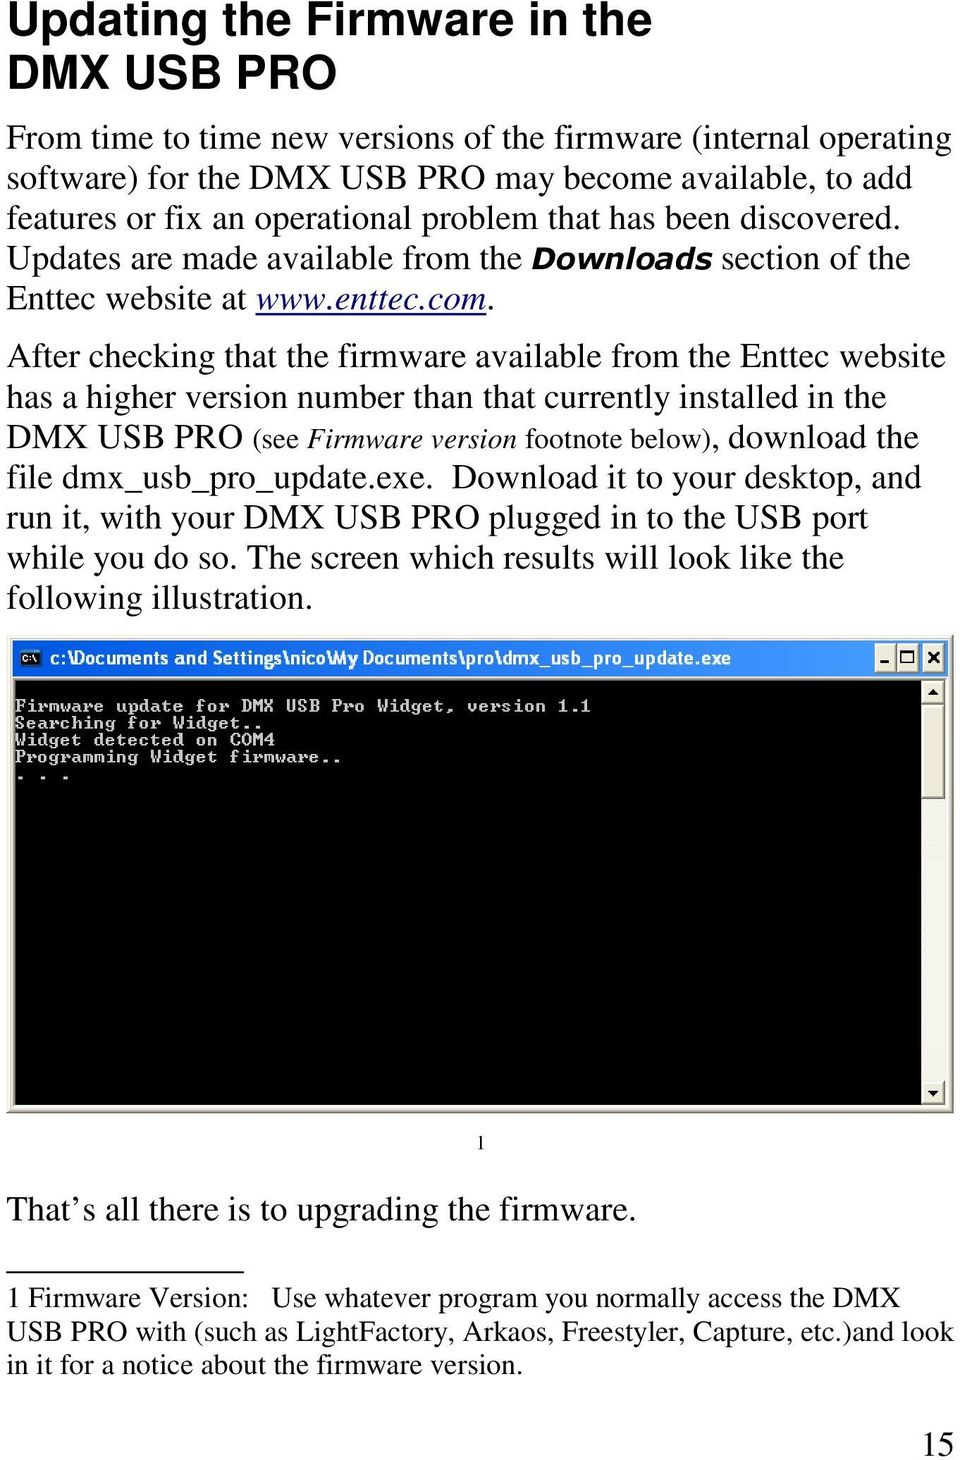 After checking that the firmware available from the Enttec website has a higher version number than that currently installed in the DMX USB PRO (see Firmware version footnote below), download the